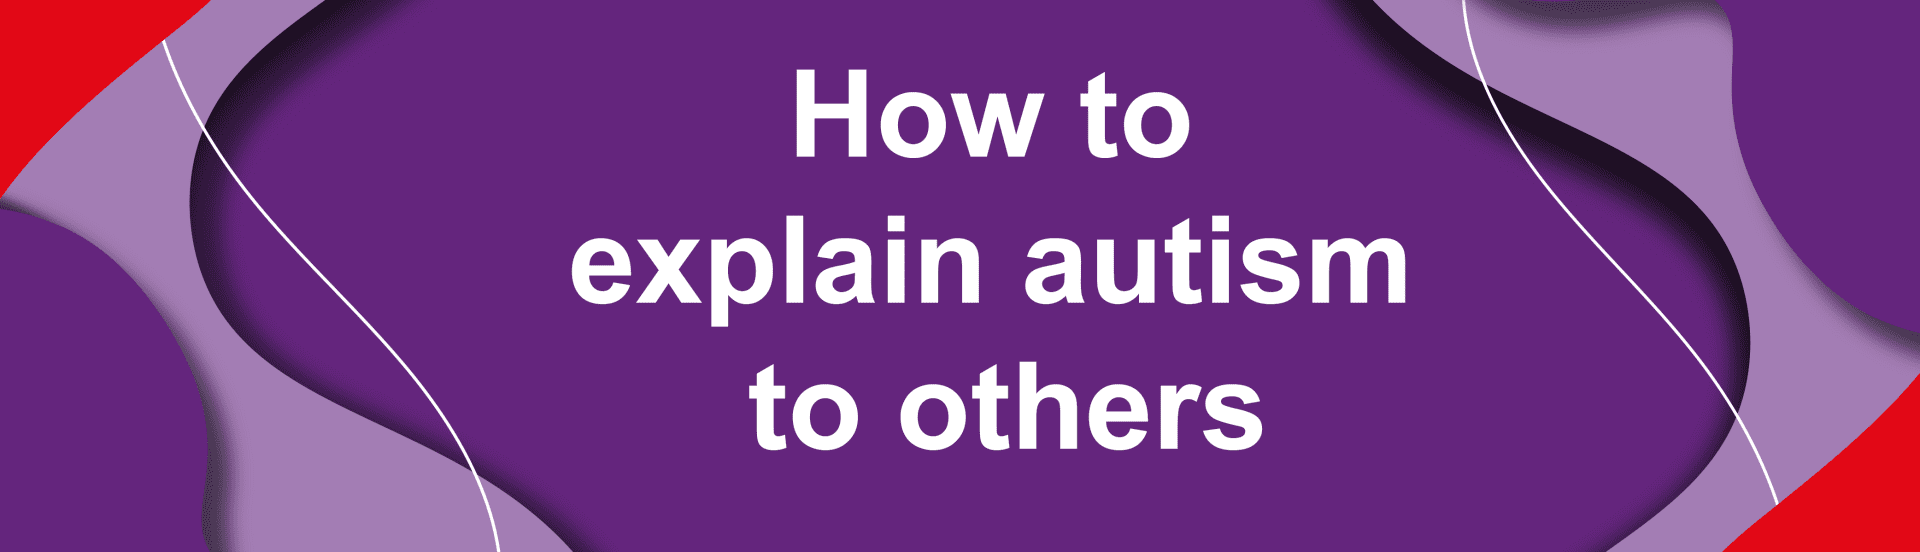 How to explain autism to others